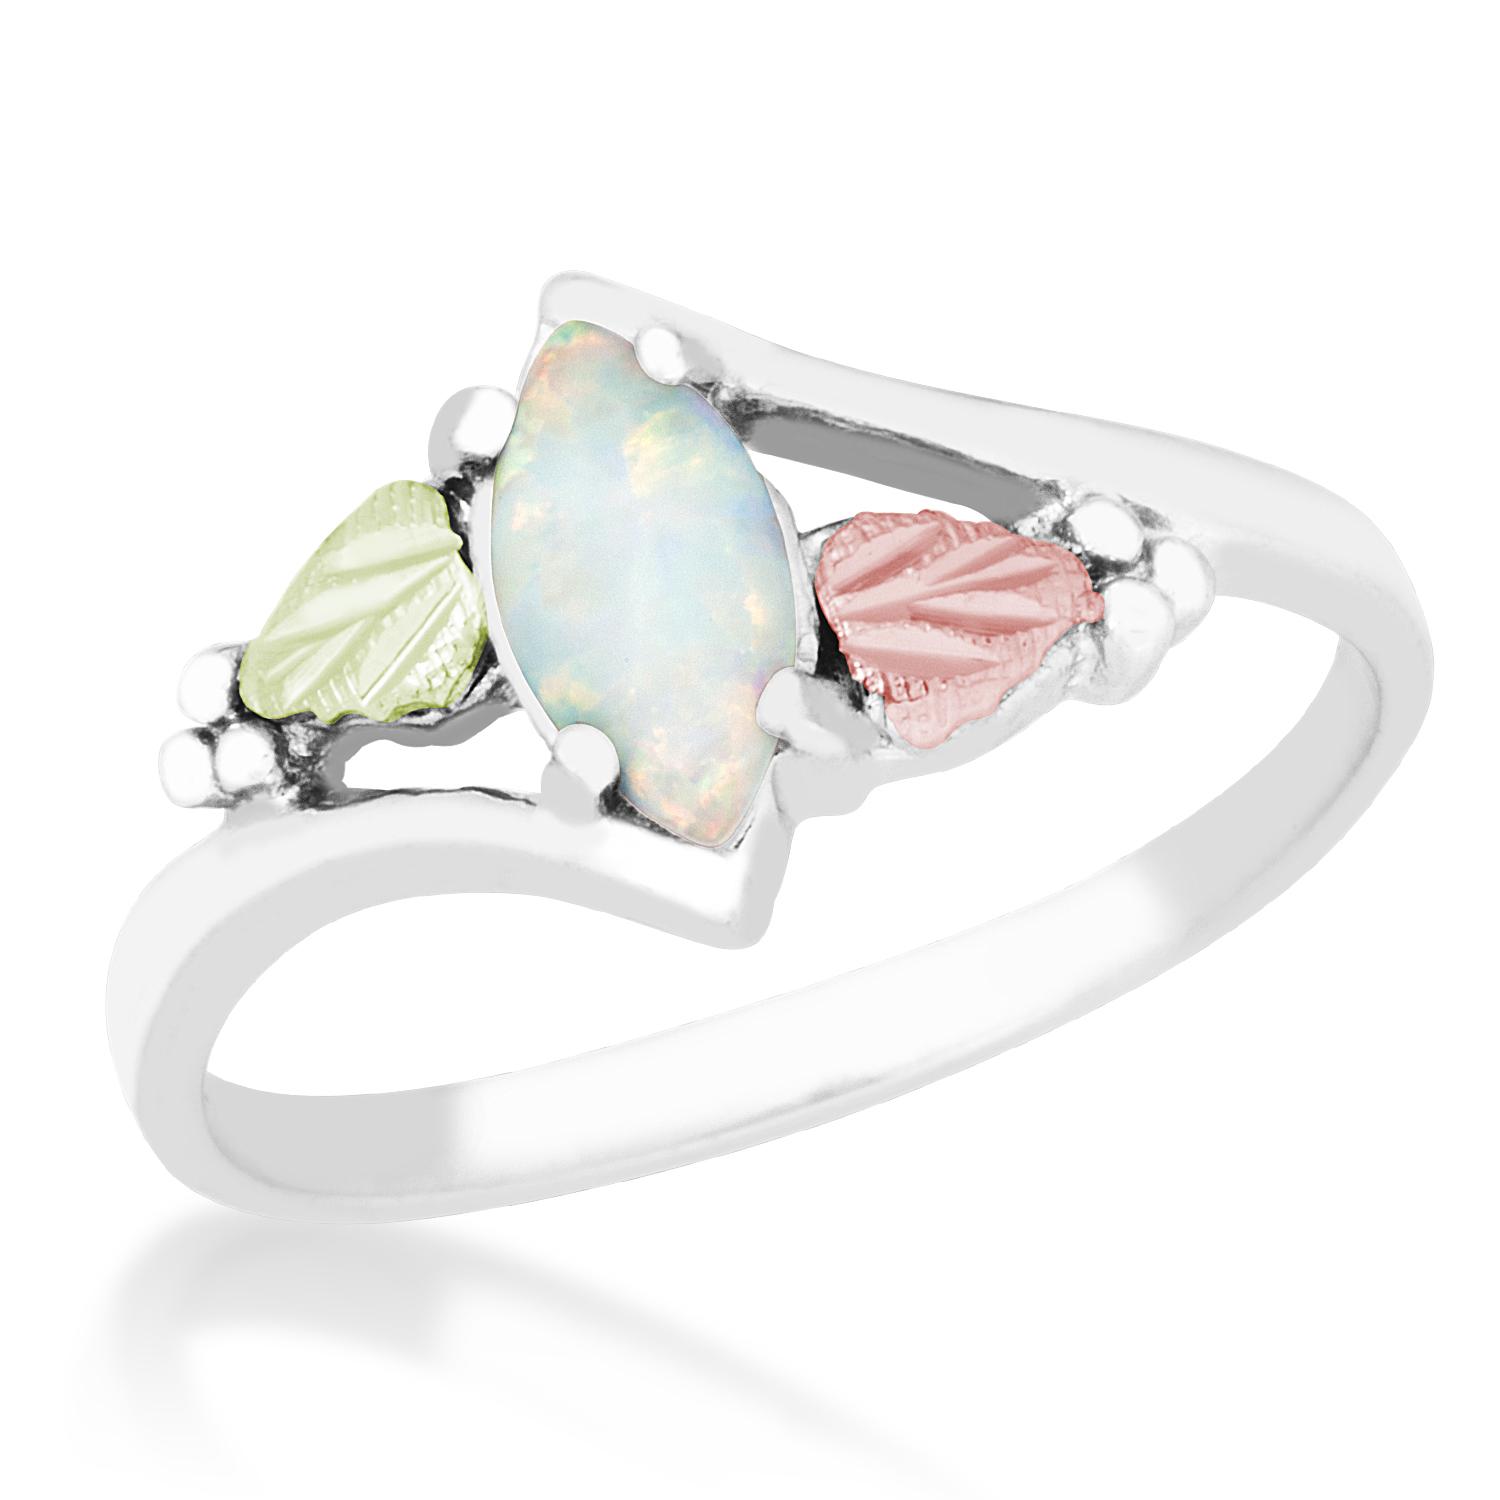 Created opal marquise cabochon bypass ring crafted in rhodium plate sterling silver, 12k rose gold, 12k green gold Black Hills Gold motif.